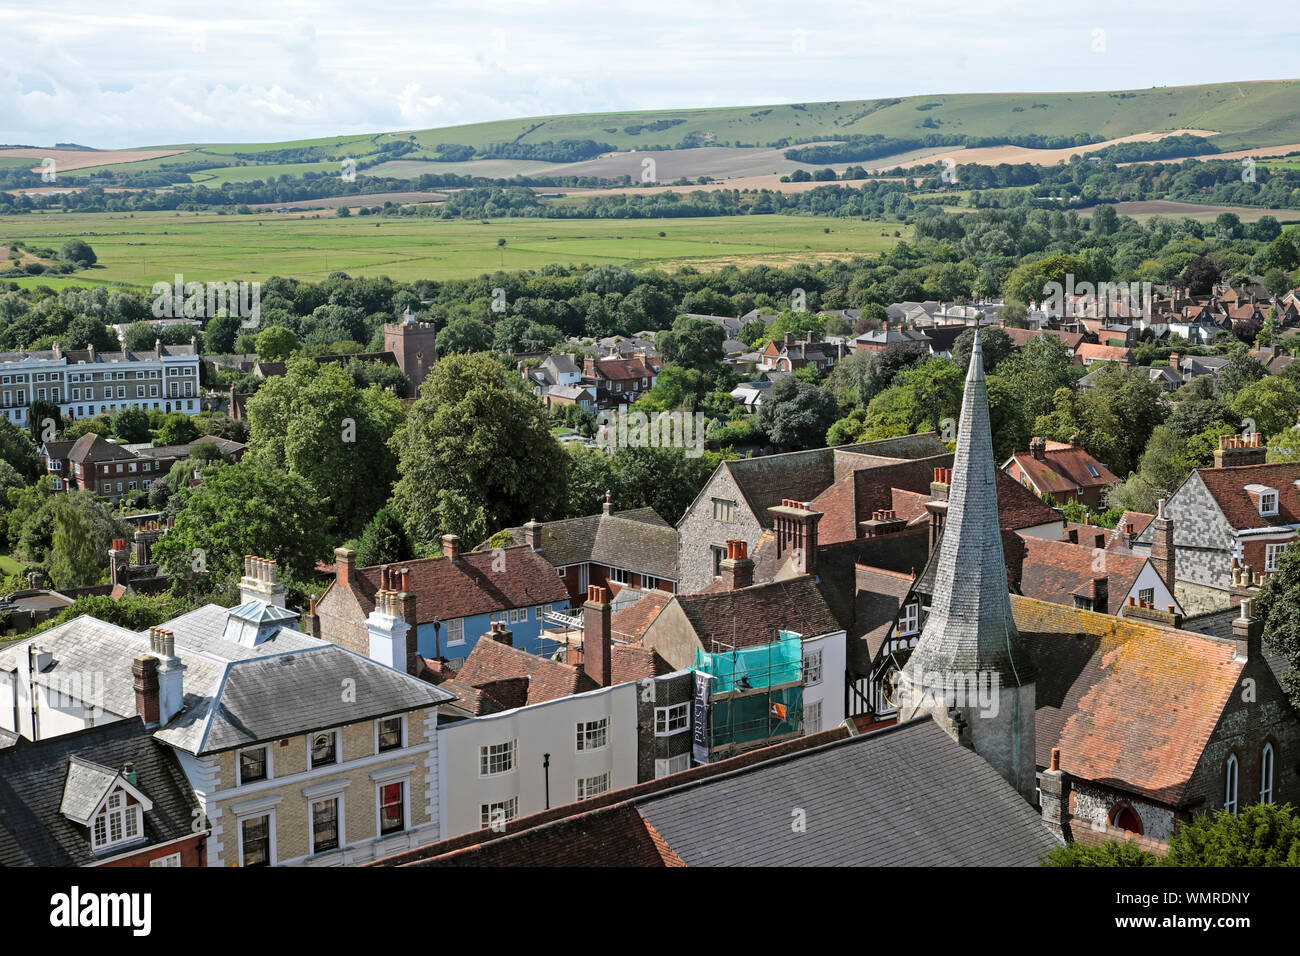 View of Lewes town, church spire, houses, rooftops and countryside landscape from Lewes Castle South Tower in Sussex England UK  KATHY DEWITT Stock Photo